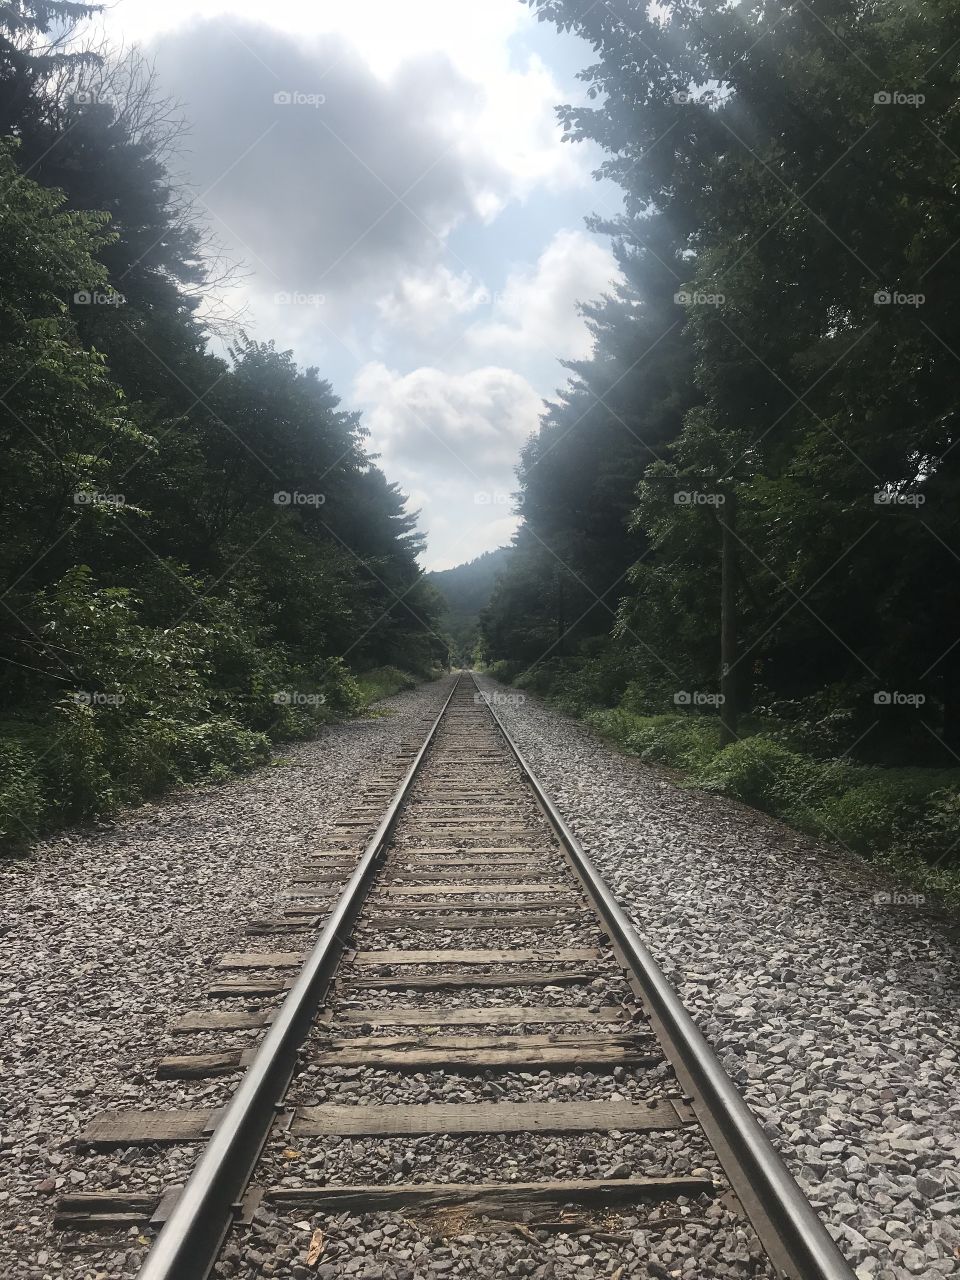 Follow the tracks, do you know where they take you?